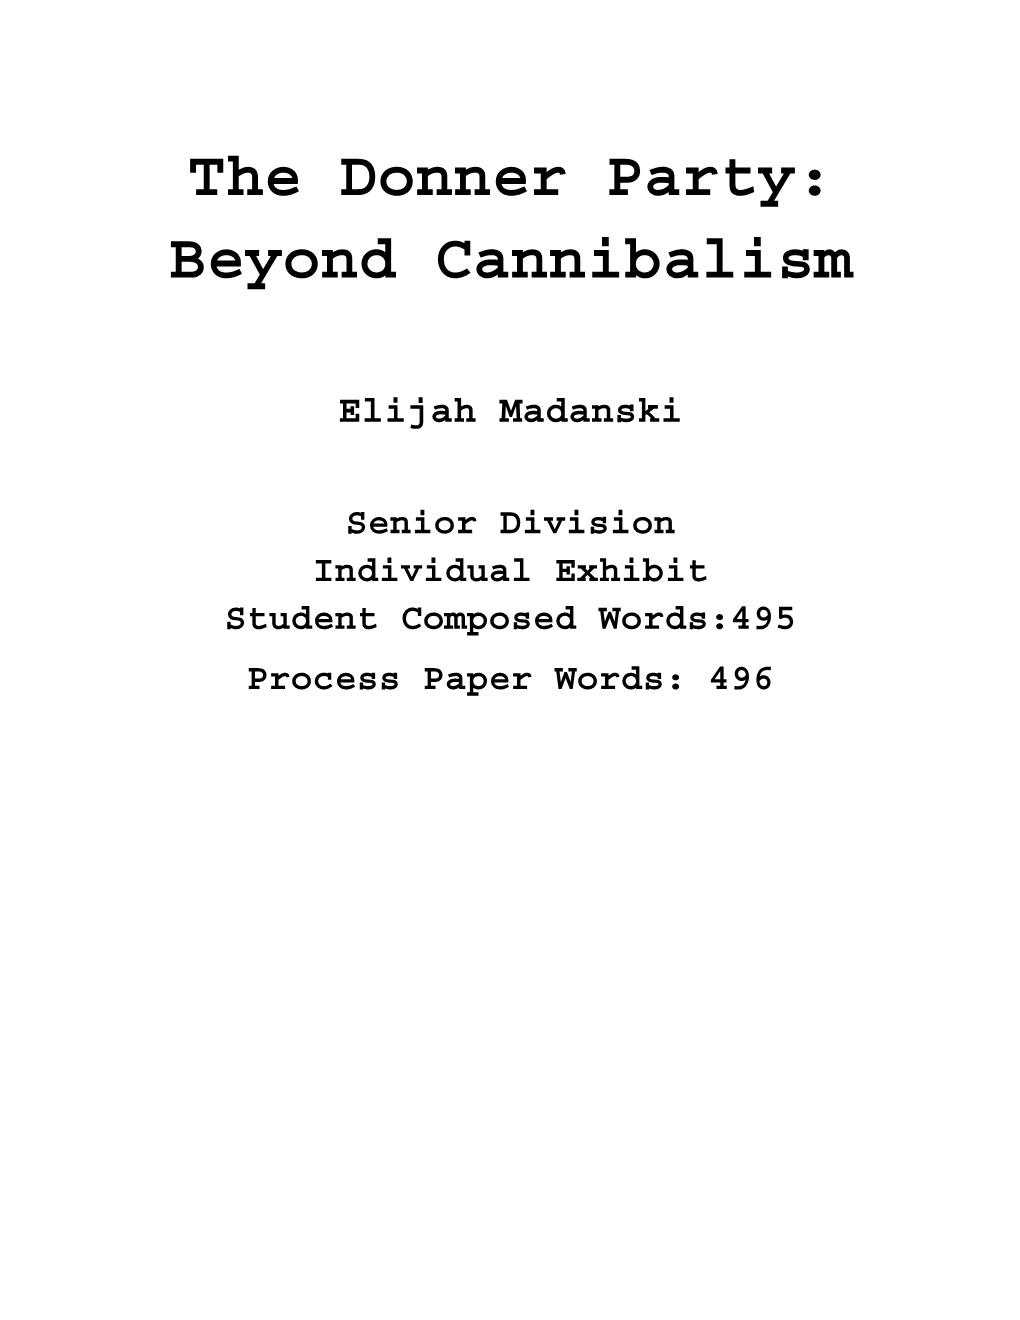 The Donner Party: Beyond Cannibalism